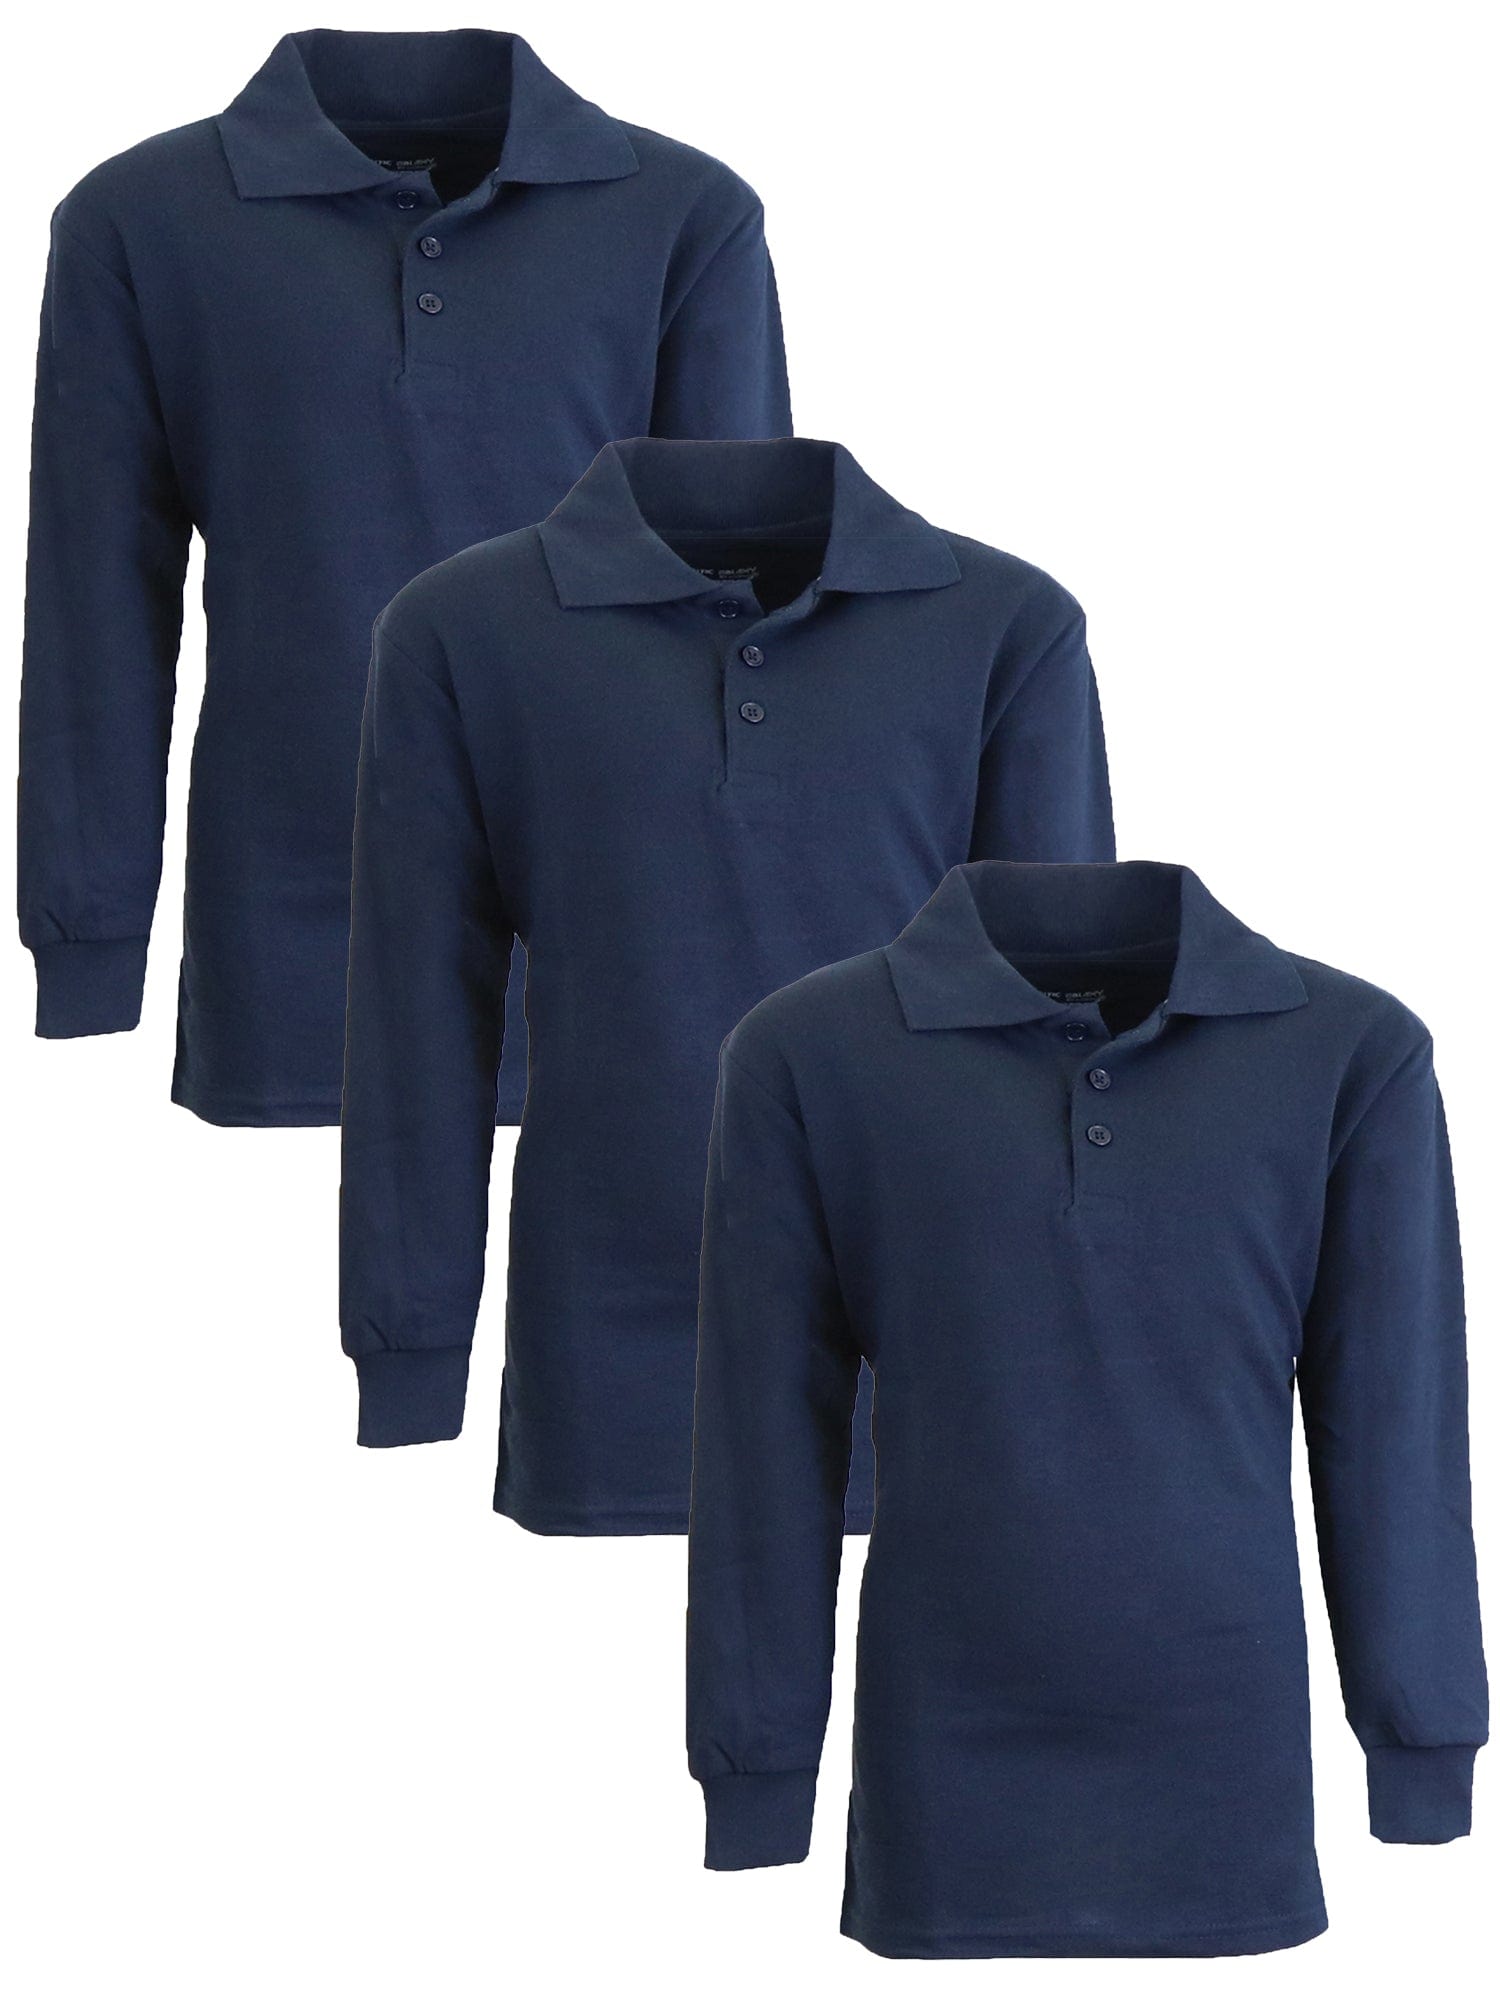 Boy's (3-PACK) Long Sleeve Pique Polo Shirt - (Sizes 4-20) - GalaxybyHarvic